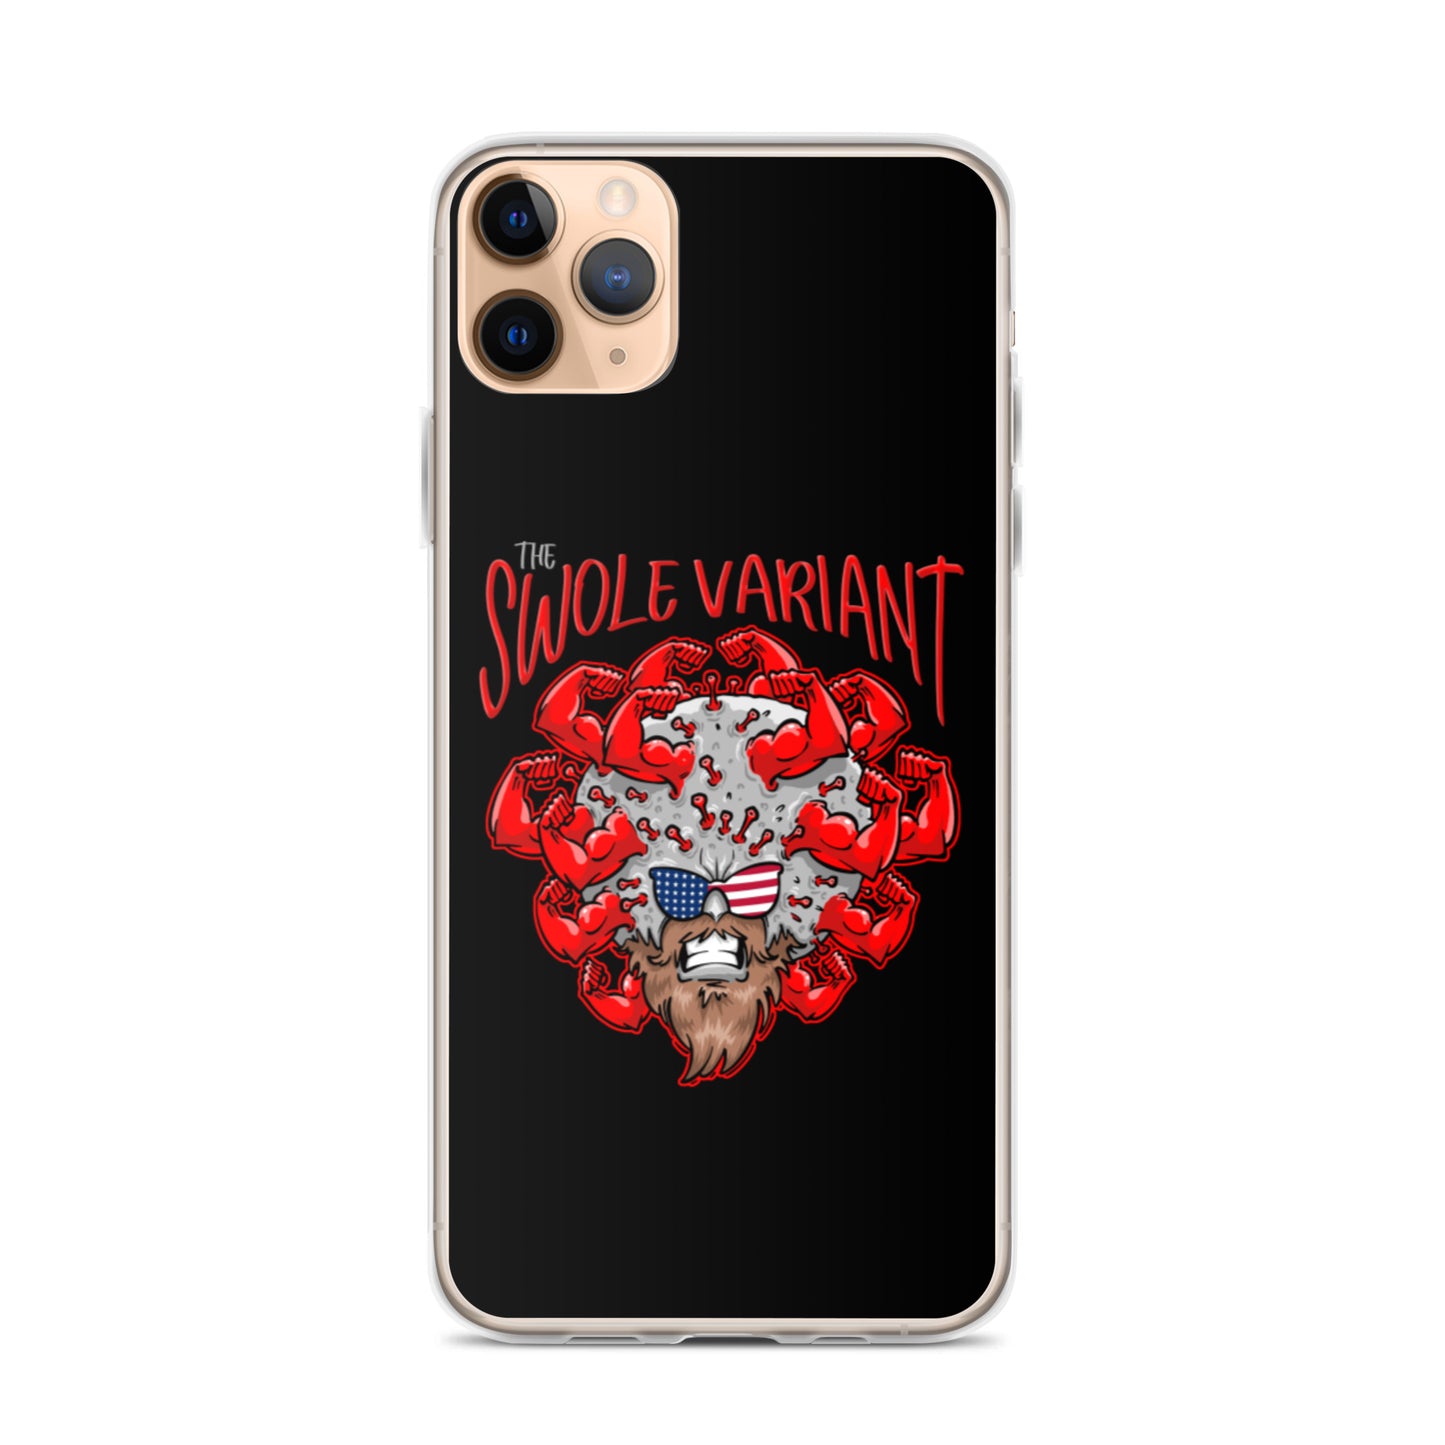 The Swole Variant iPhone Case